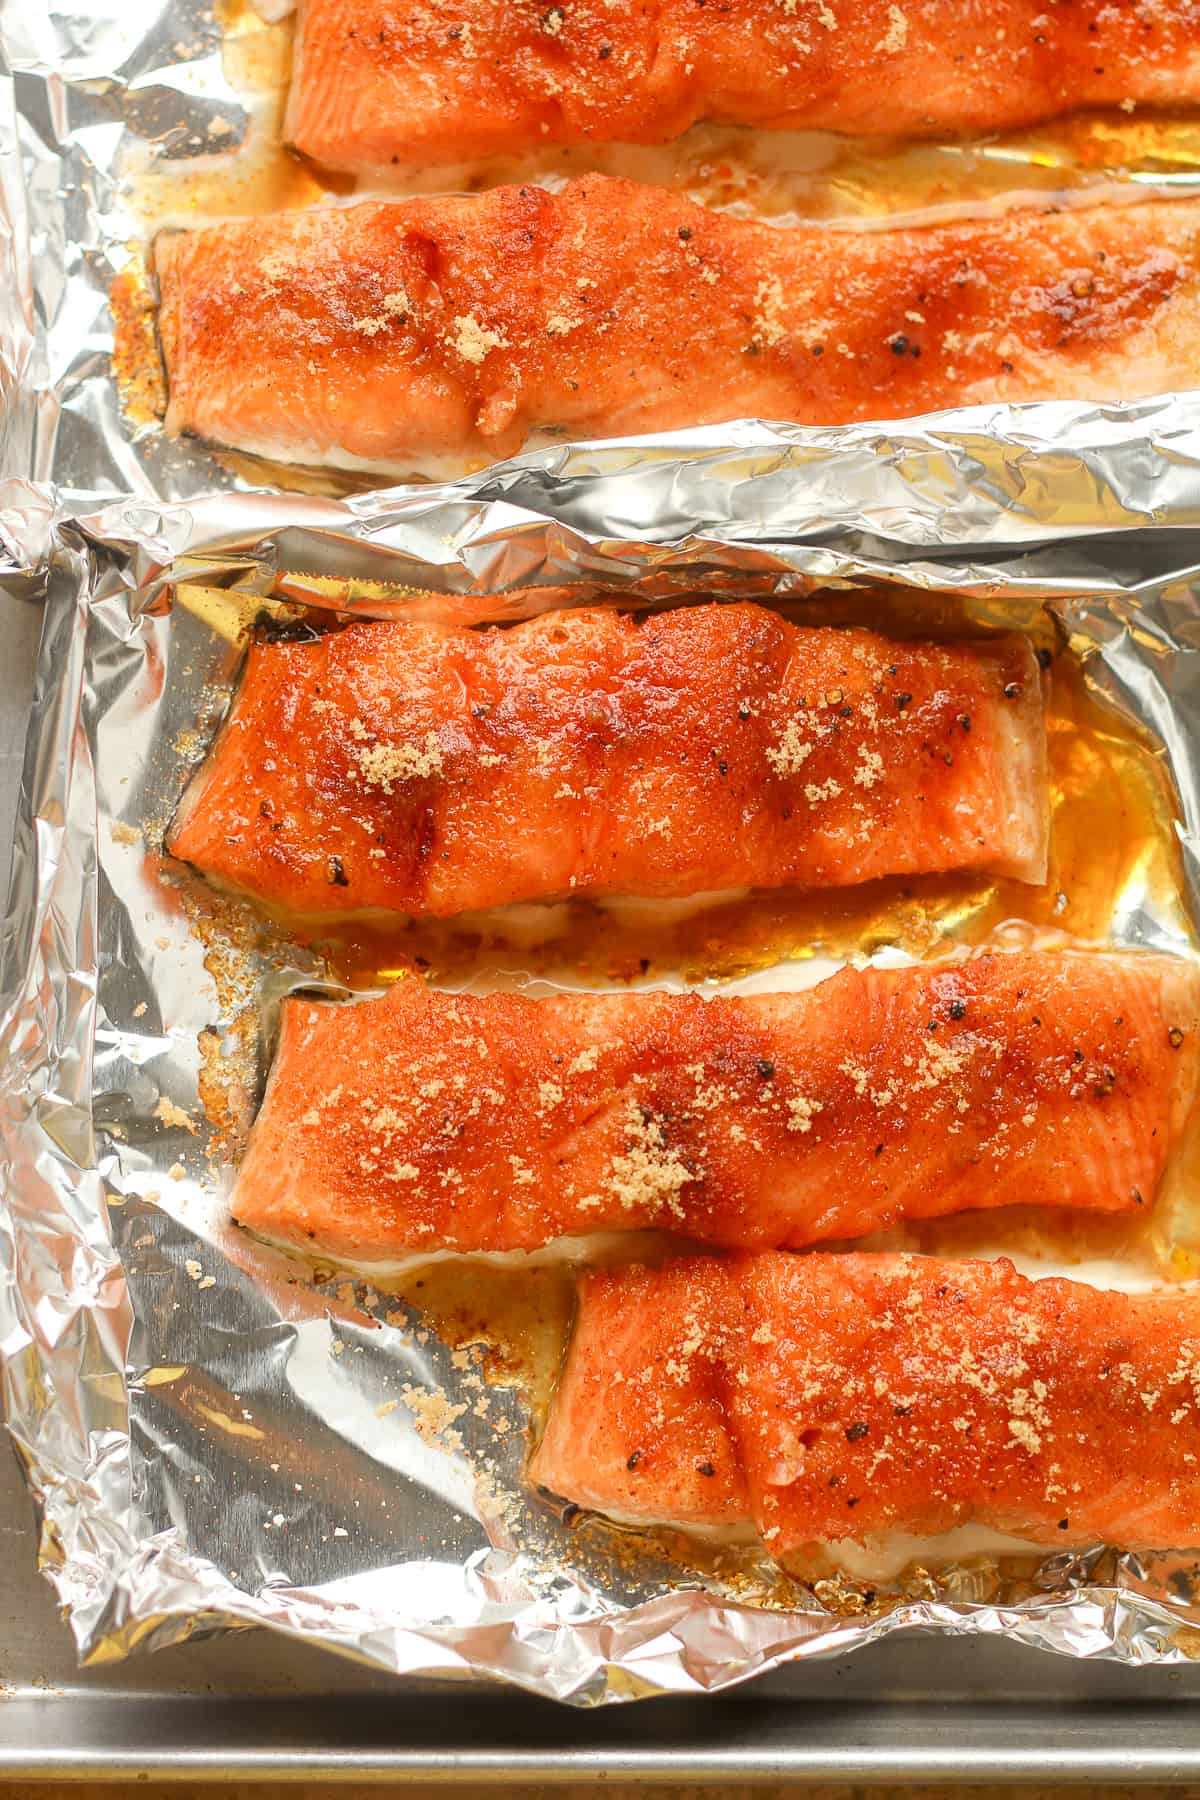 Overhead view of several pieces of brown sugar smoked salmon.